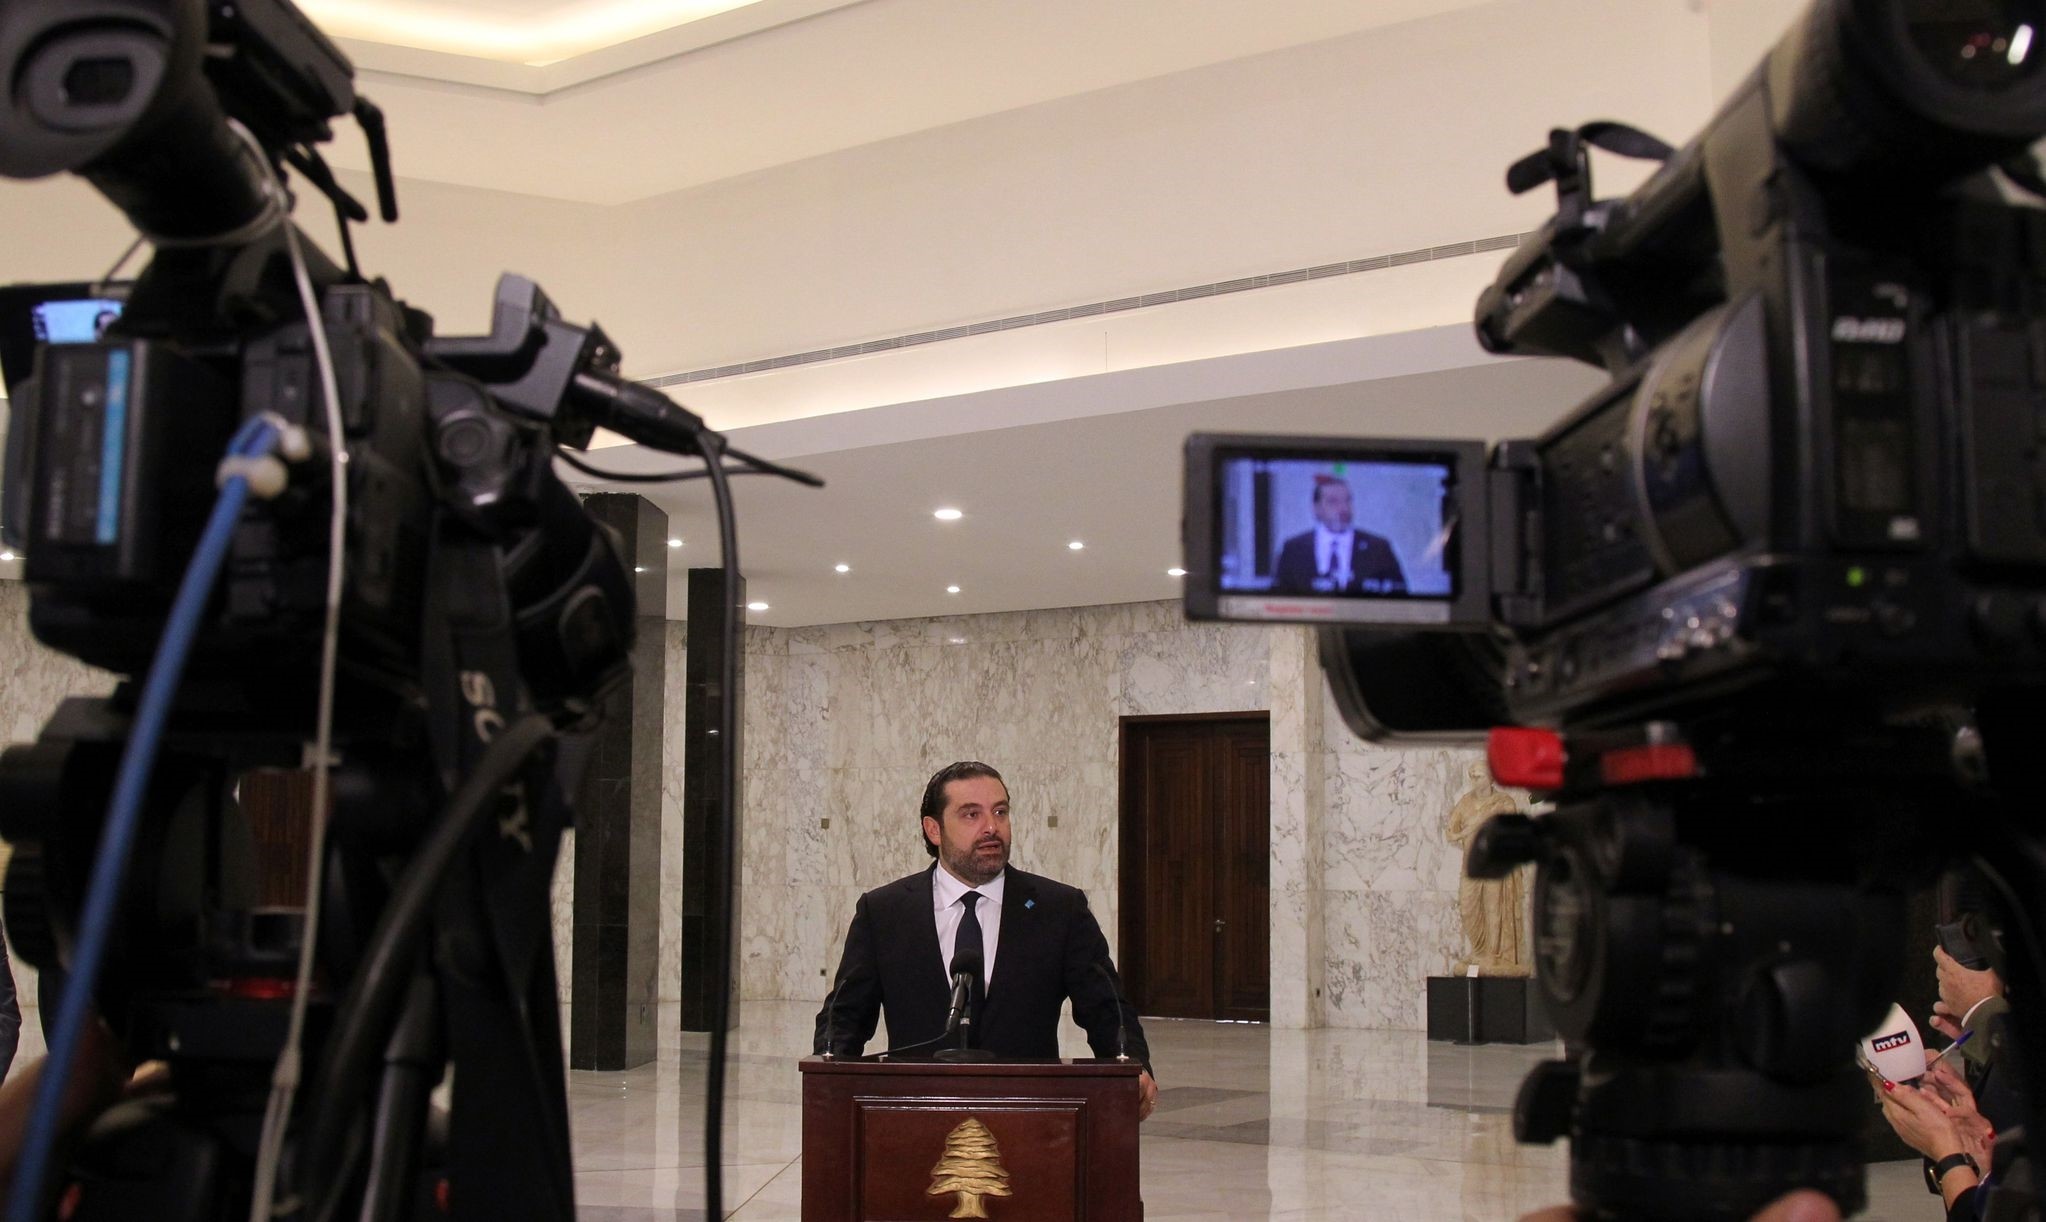 Lebanon's new Prime Minister Saad Hariri speaks to journalists following his nomination at the presidential palace in Baabda, near Beirut, on November 3, 2016. (AFP Photo)